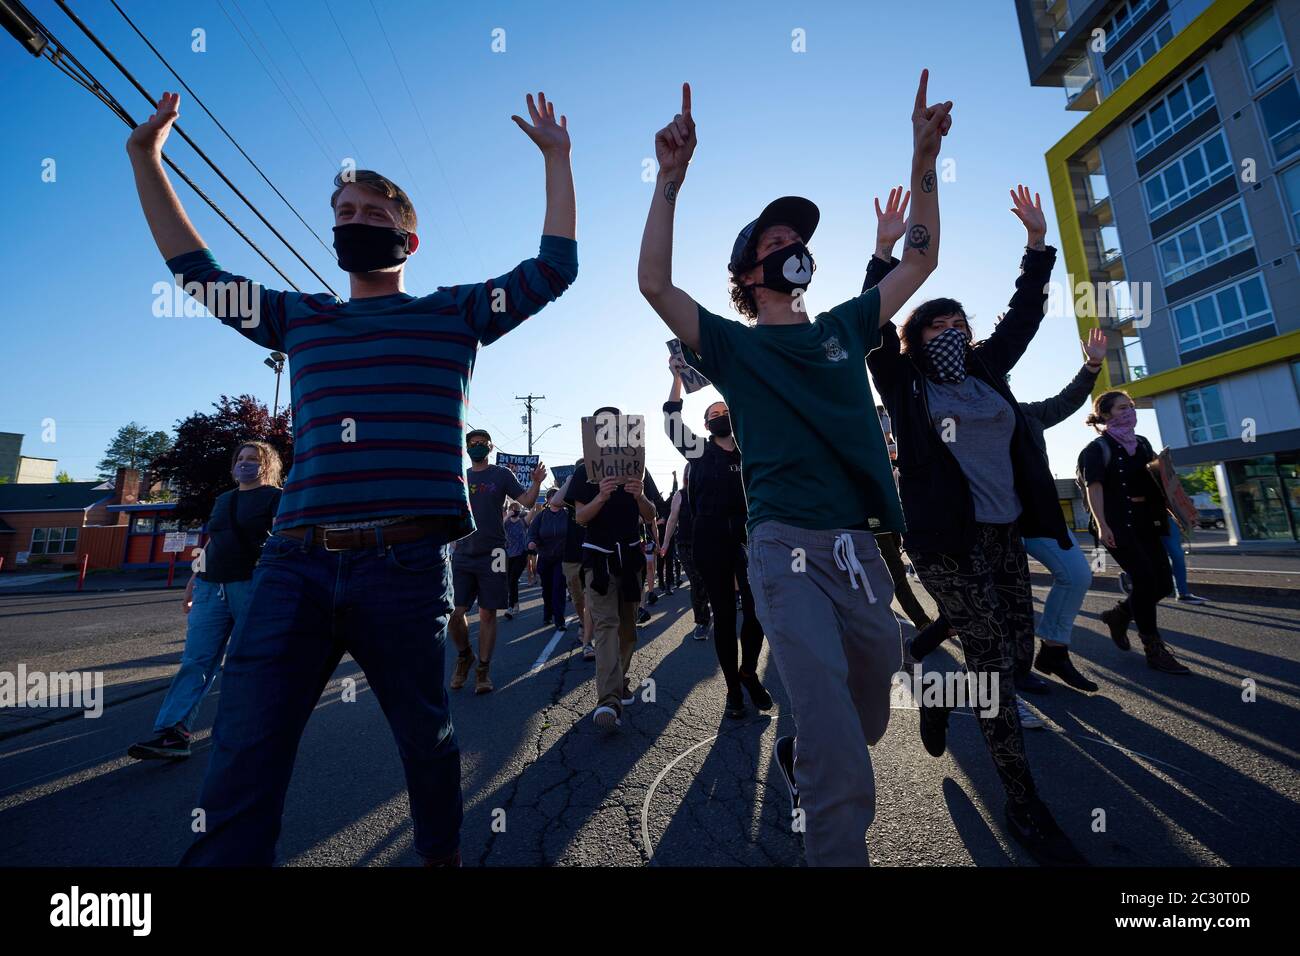 Chanting 'Hands up, don't shoot,' protesters march with their hands raised during a June 3, 2020, Black Lives Matter protest in Eugene, Oregon. Stock Photo